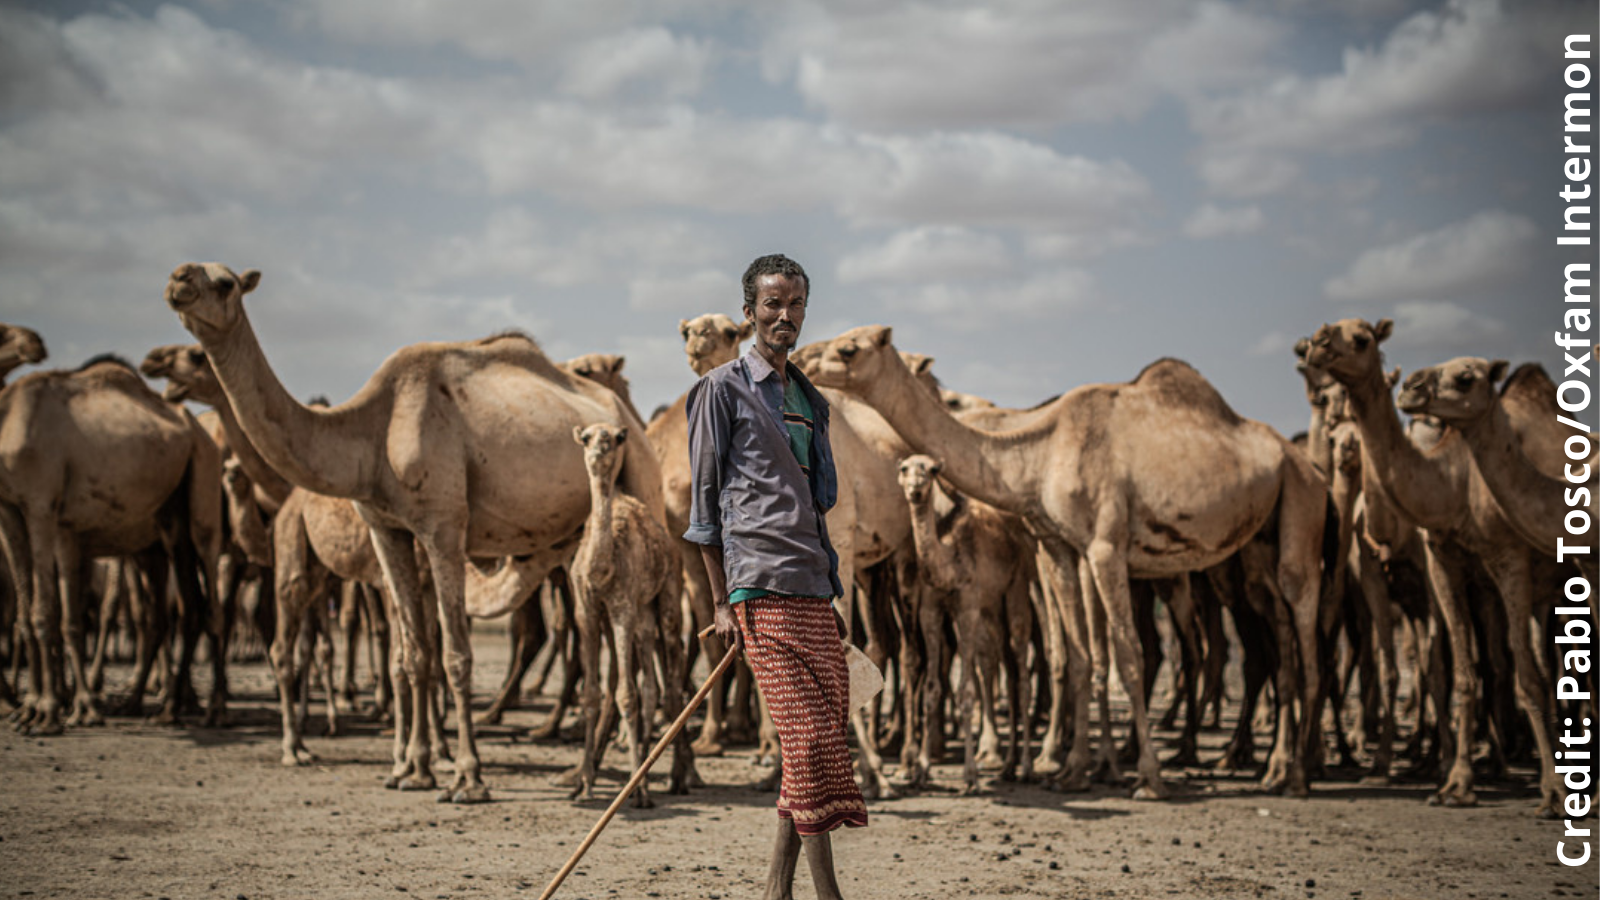 Man standing in front of cattle in Ethiopia